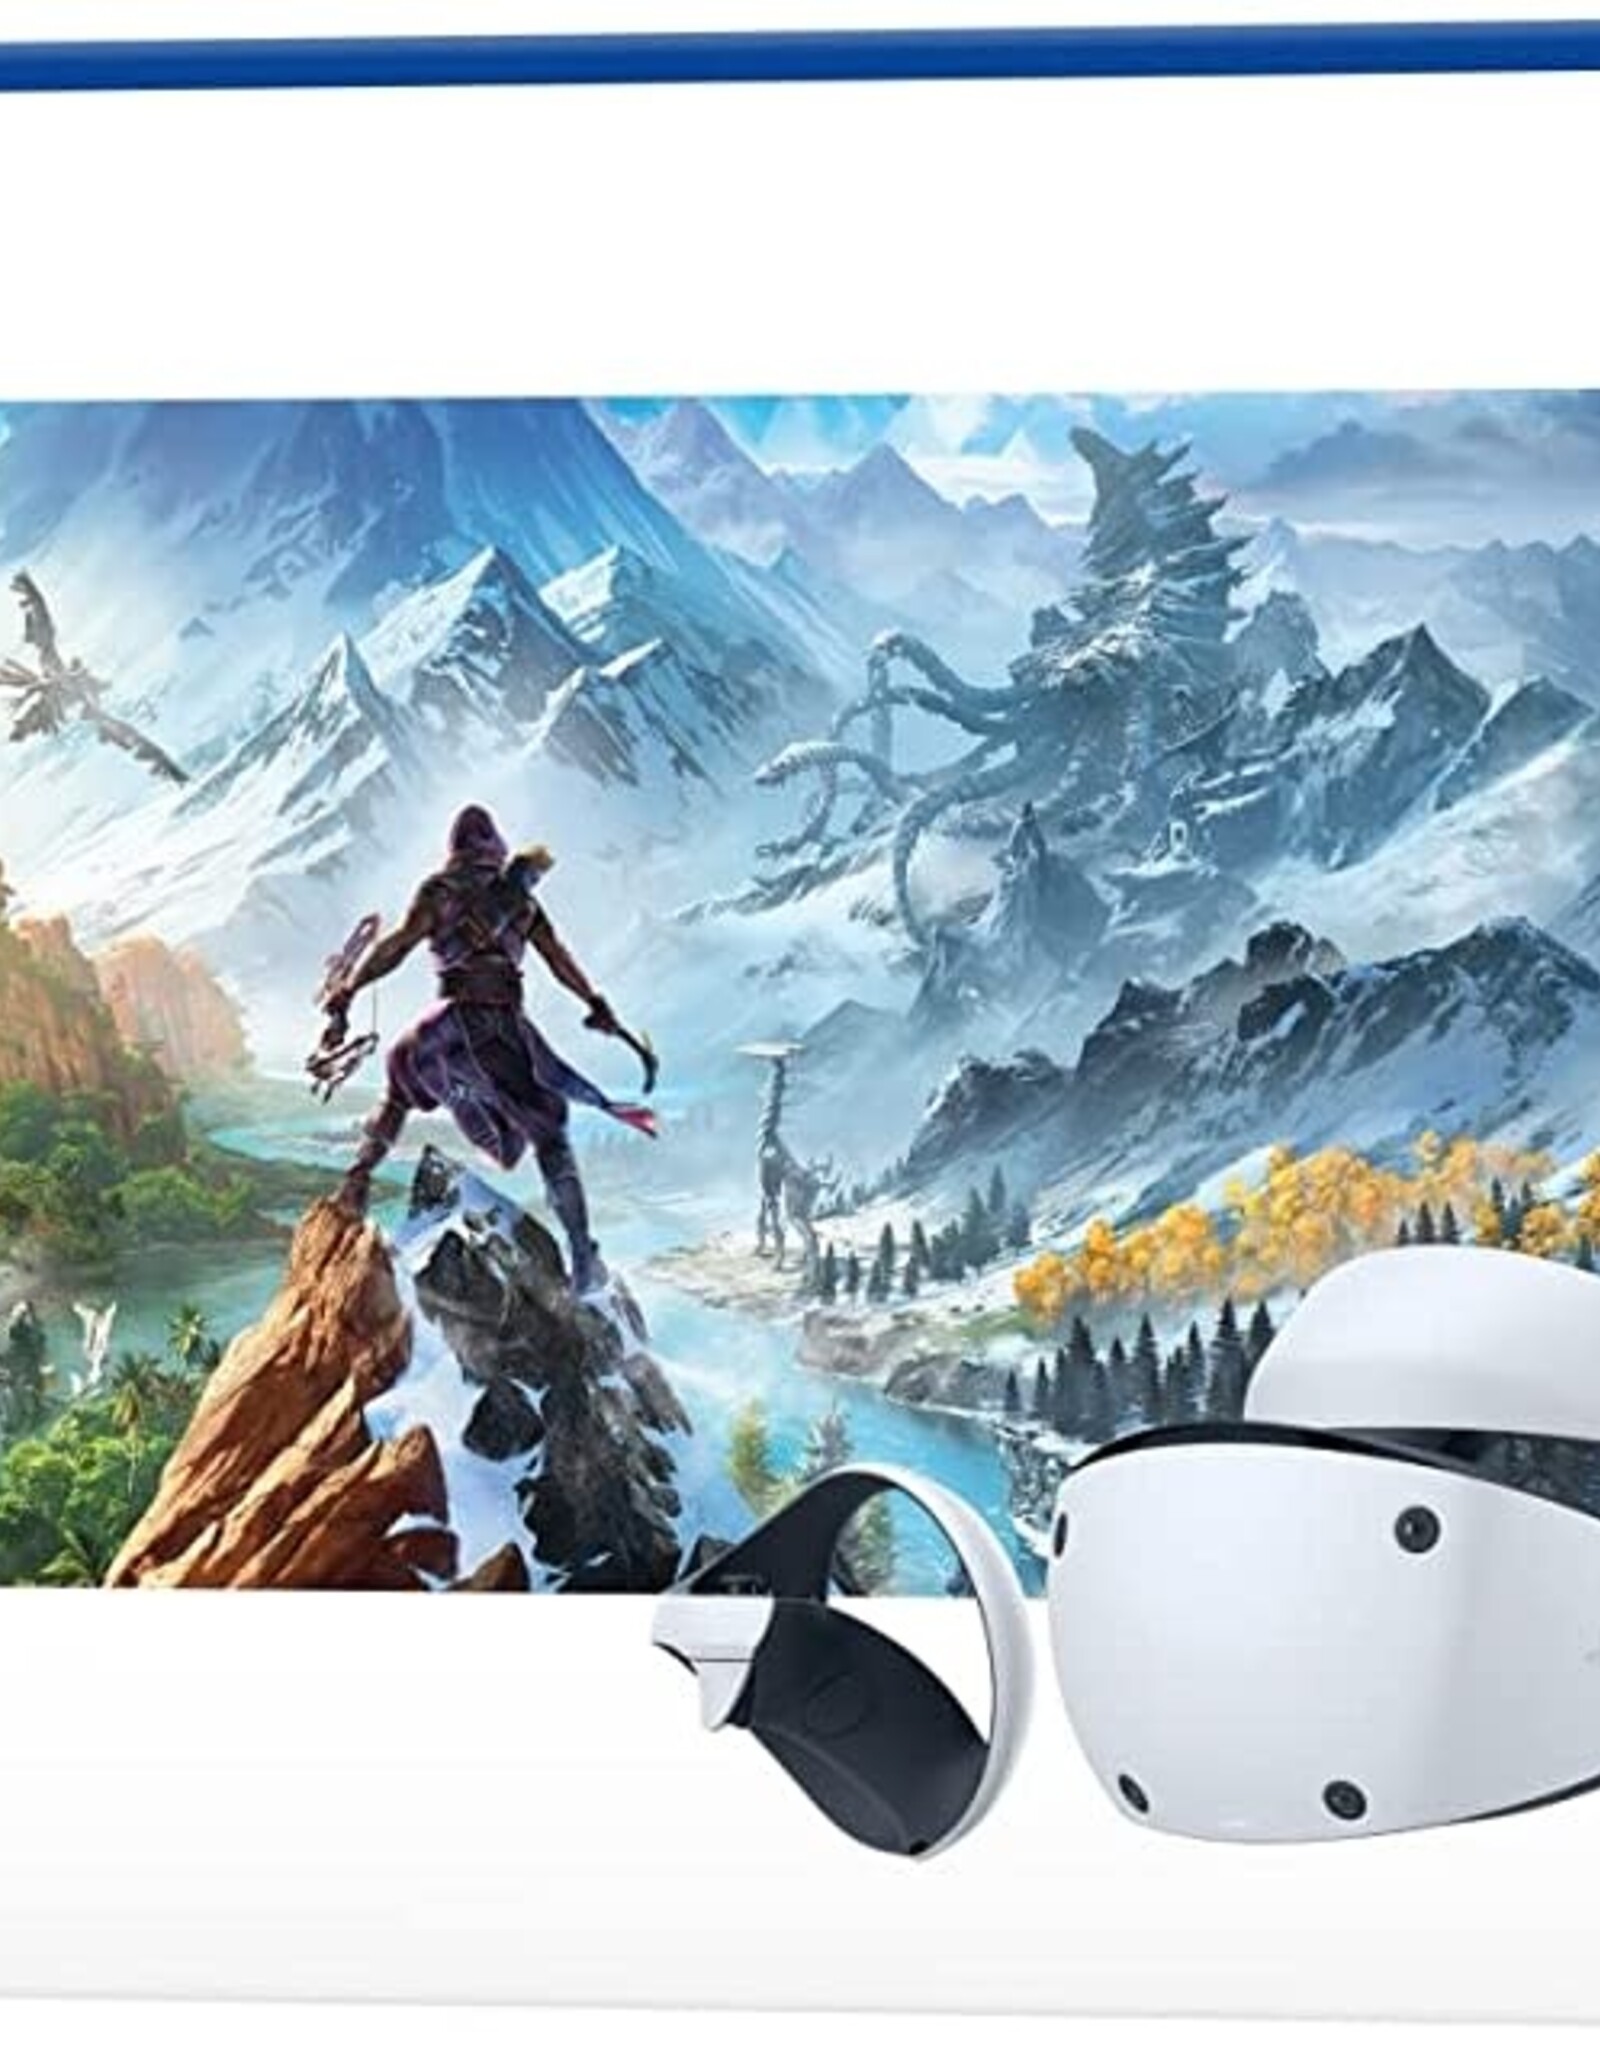 PlayStation VR2 Horizon Call of the Mountain™ Bundle 